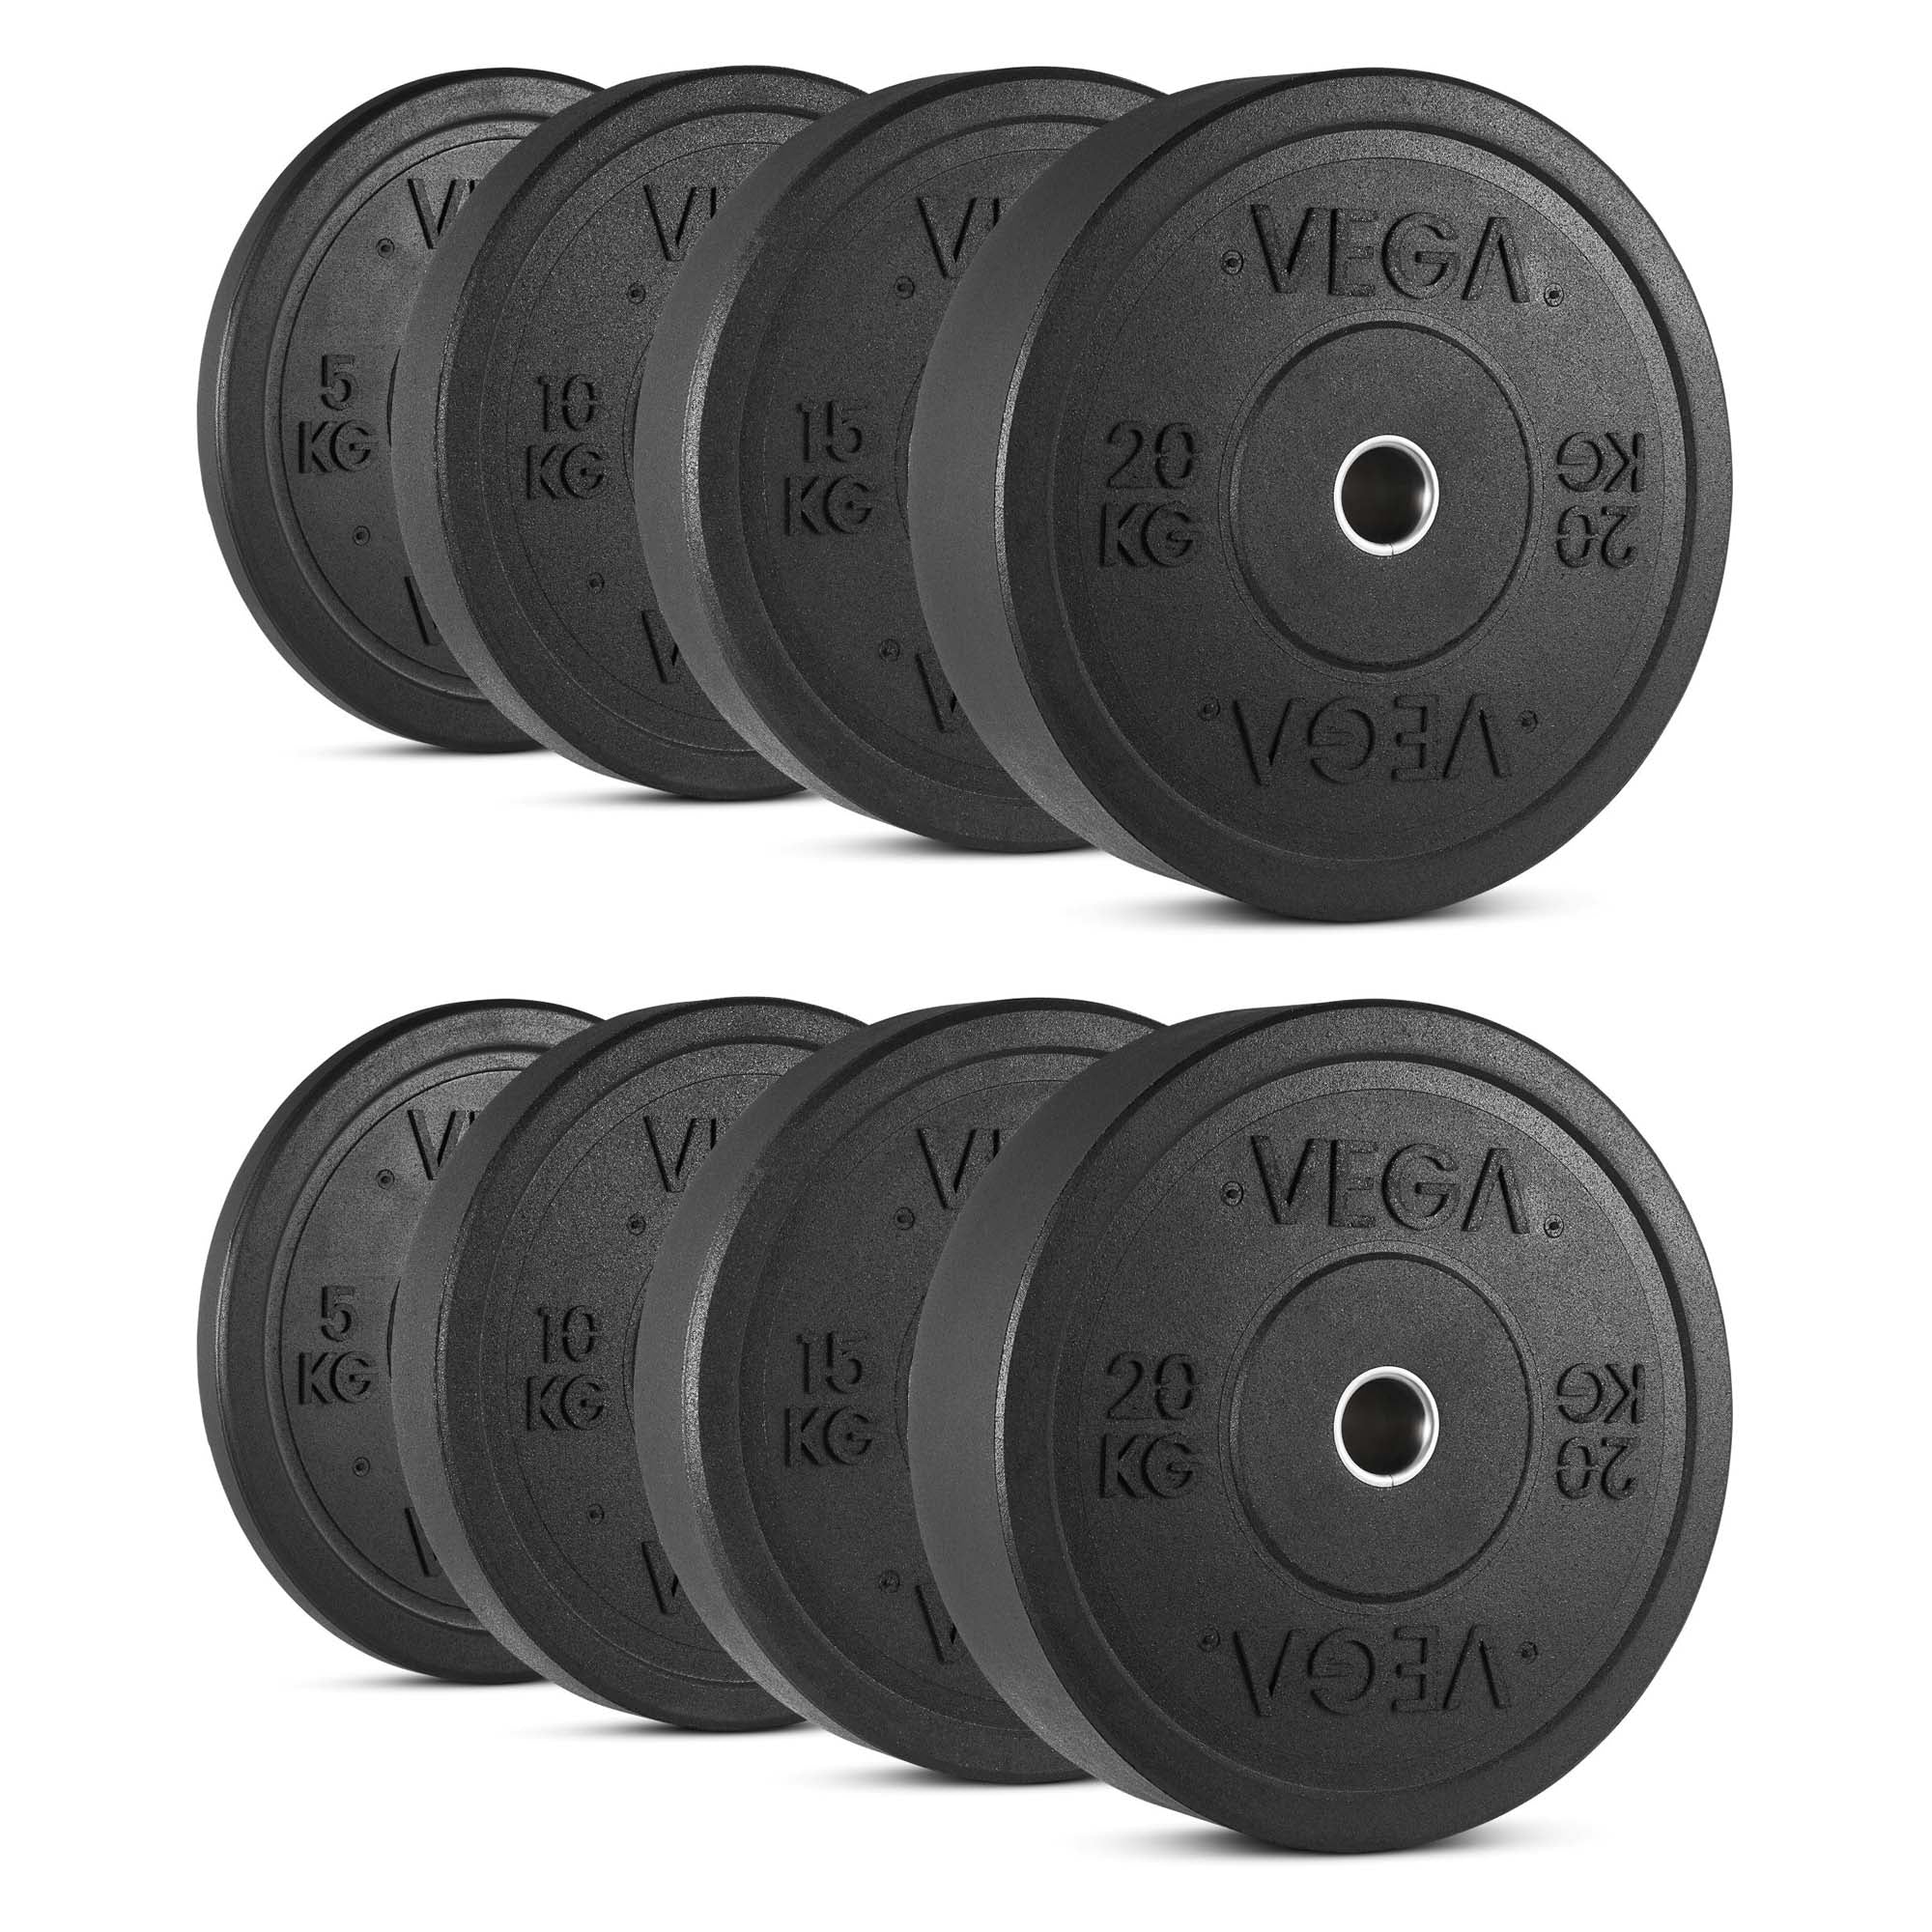 Image of Vega 100kg Rubber Crumb Bumper Olympic Weight Plates Set